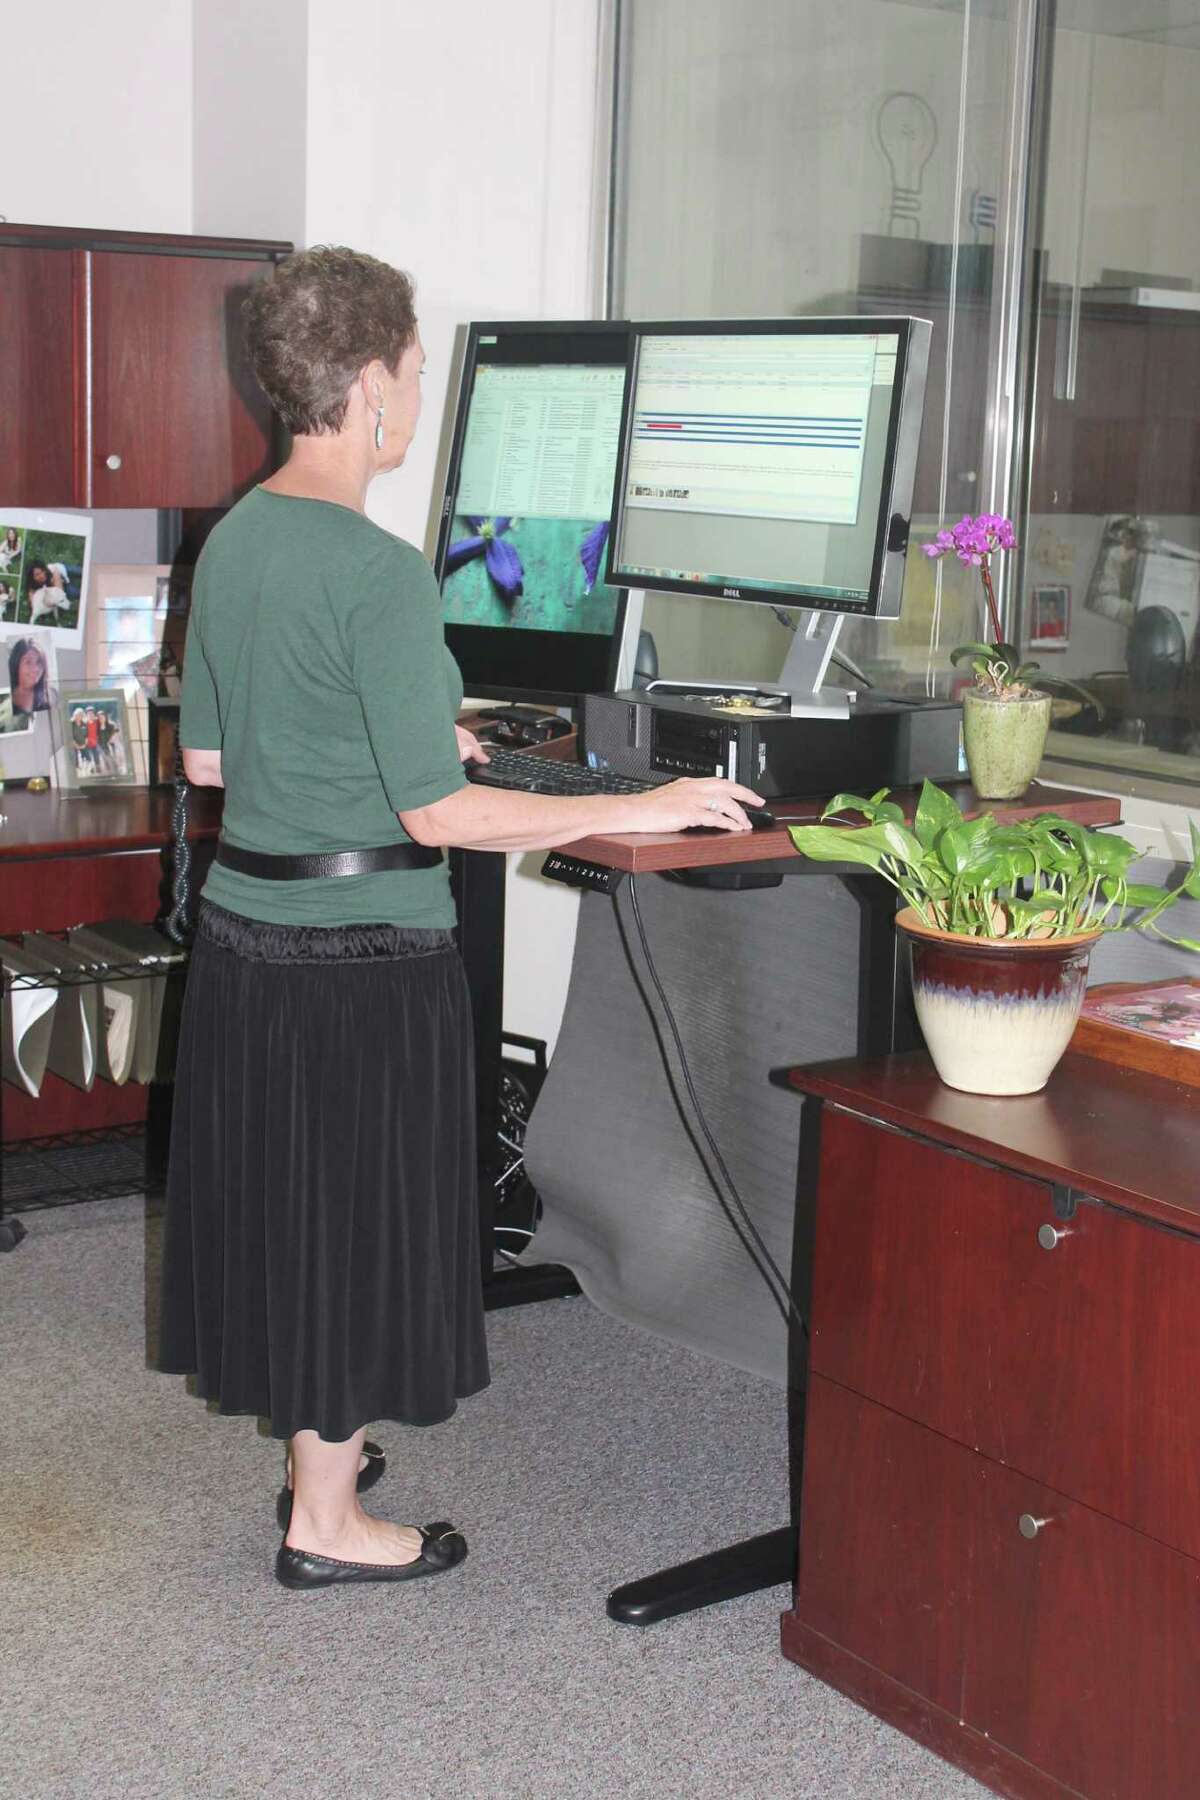 The Jarvis standing desk, available at ergodepot.com, is electronically adjustable and has 26 inches of adjustment, with a maximum height of 51 inches.